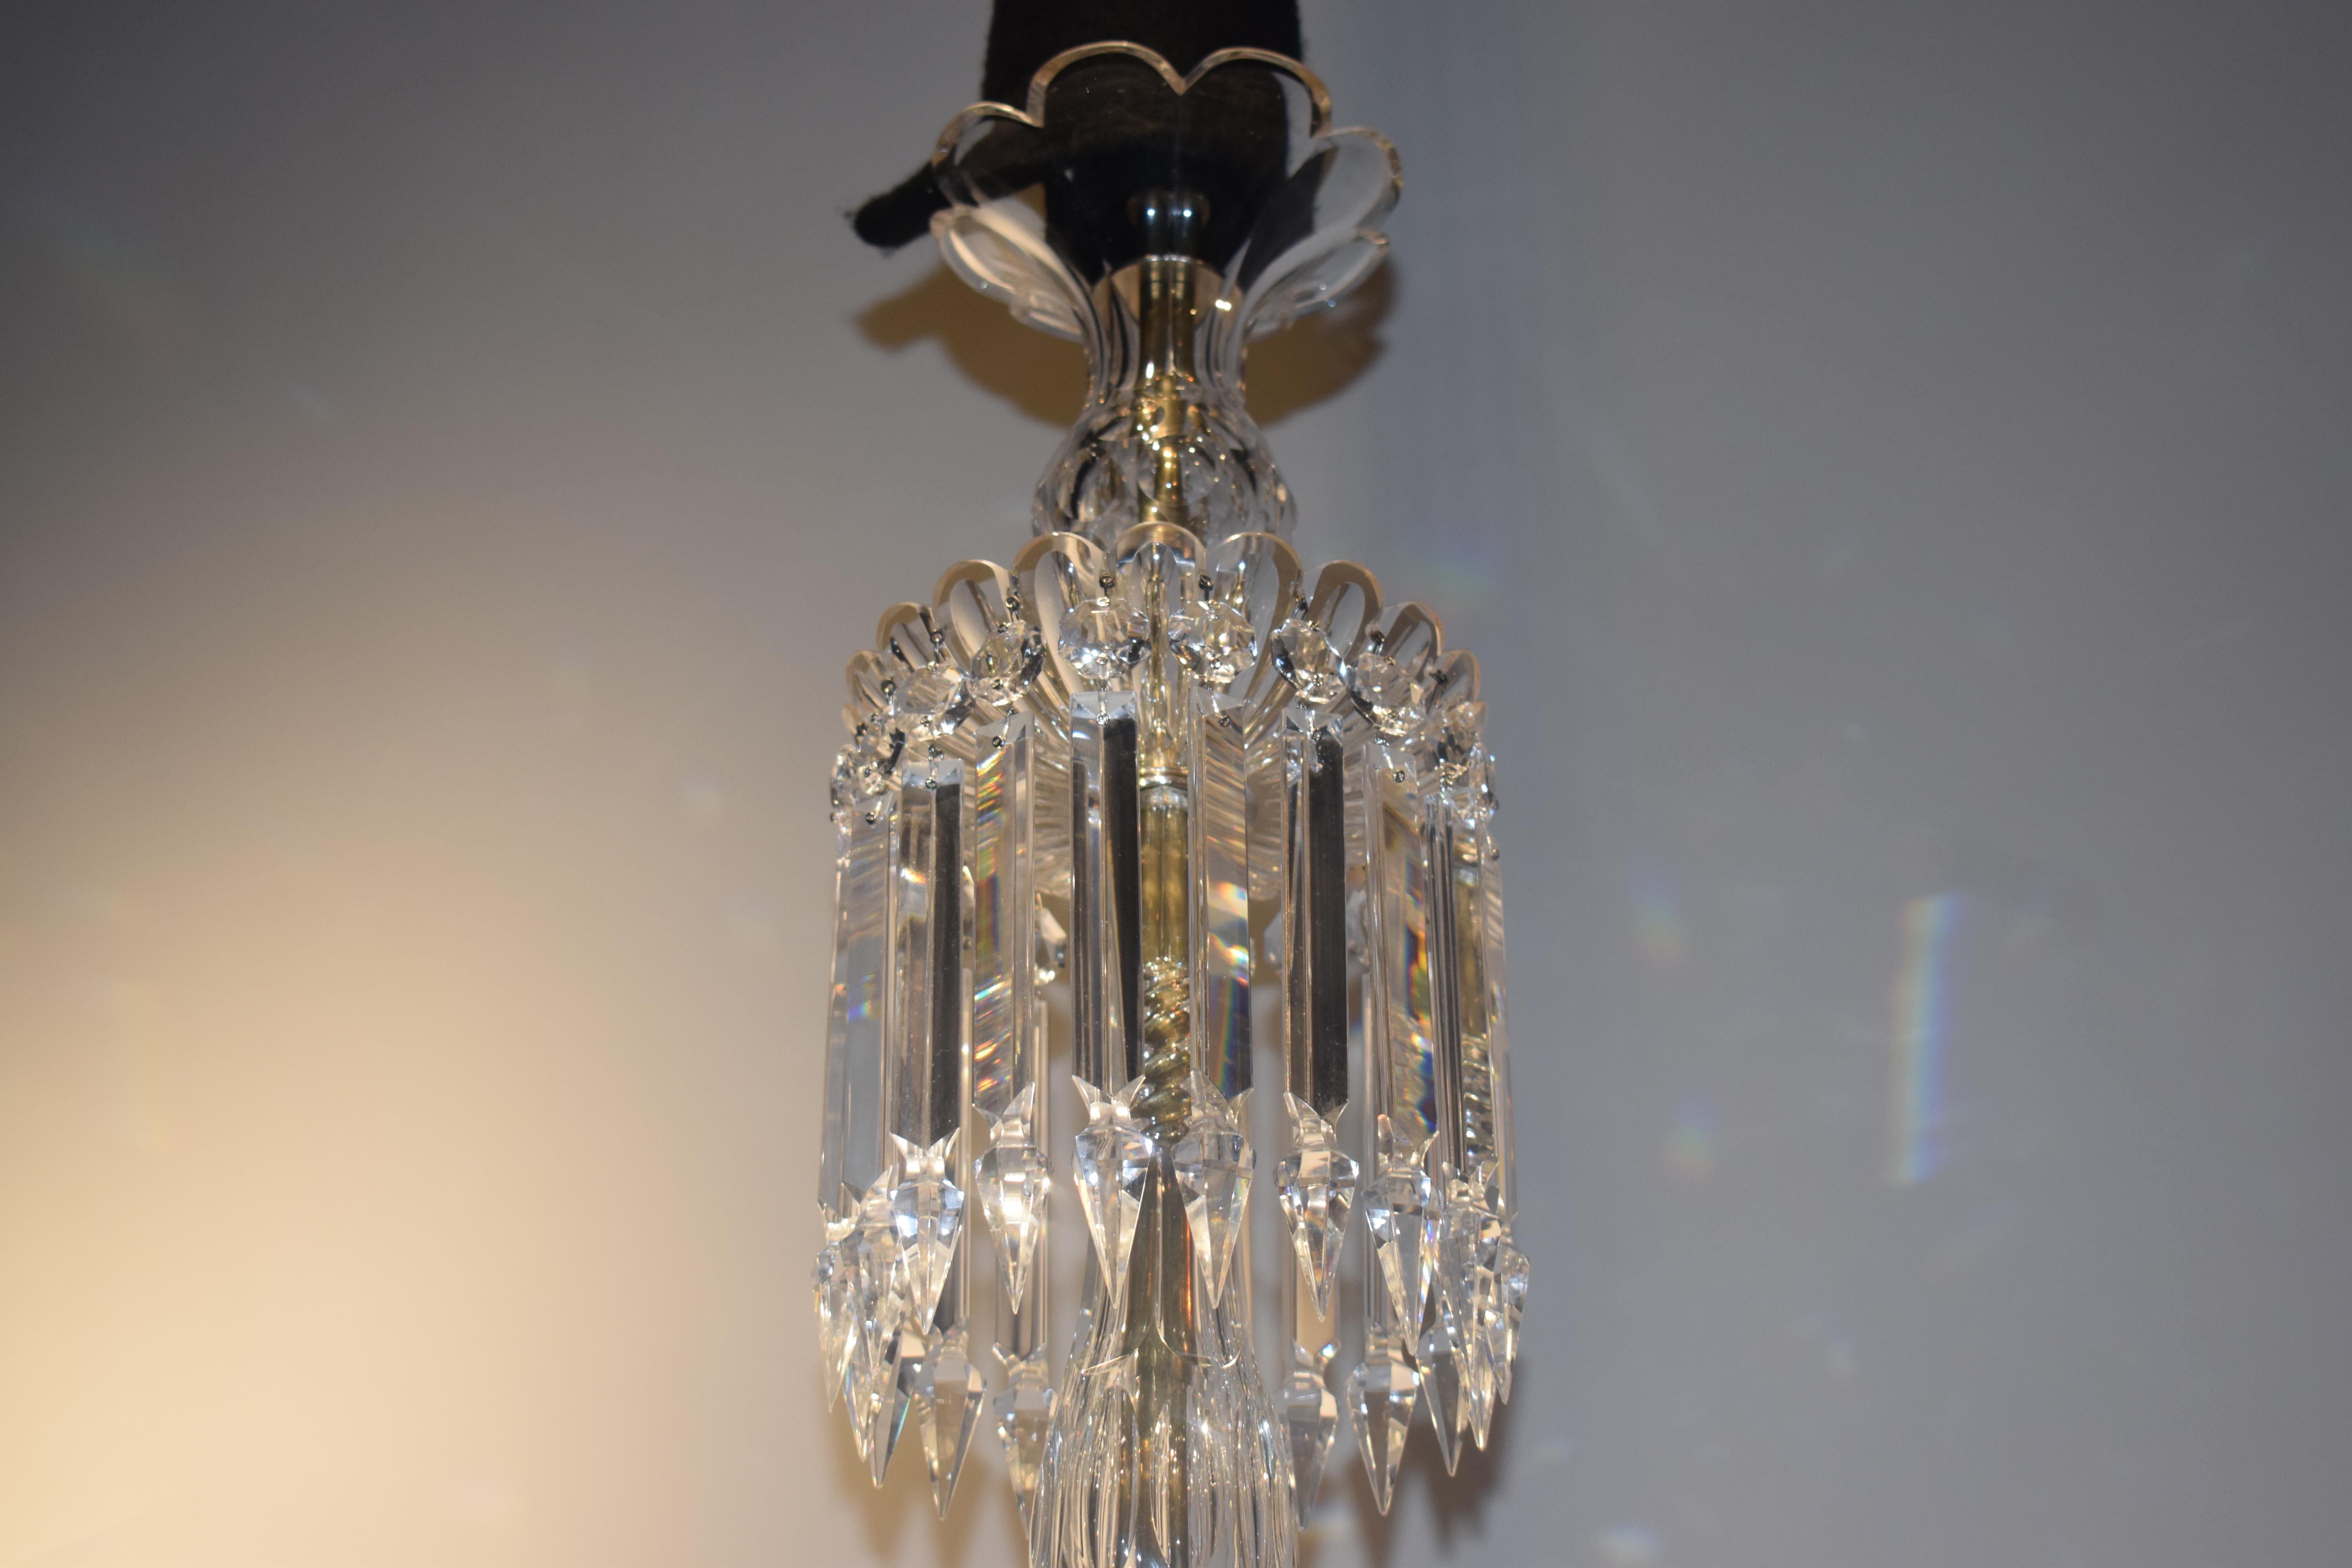 A Very Fine Crystal 10 Light Chandelier by Baccarat In Good Condition For Sale In Atlanta, GA